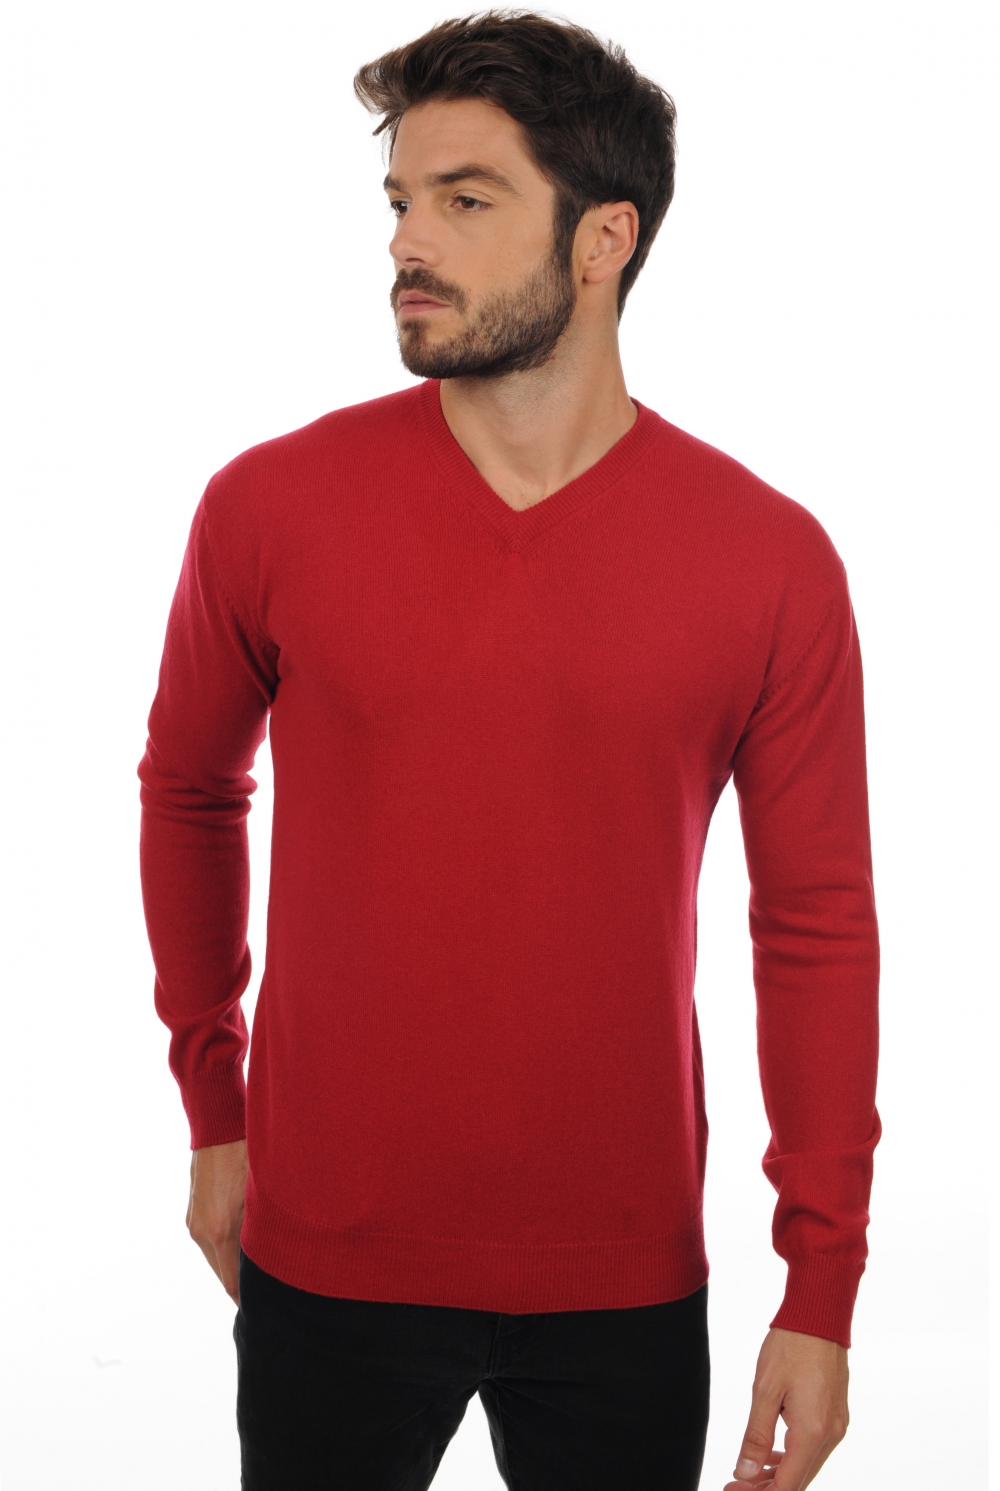 Cachemire pull homme col v maddox rouge velours 4xl